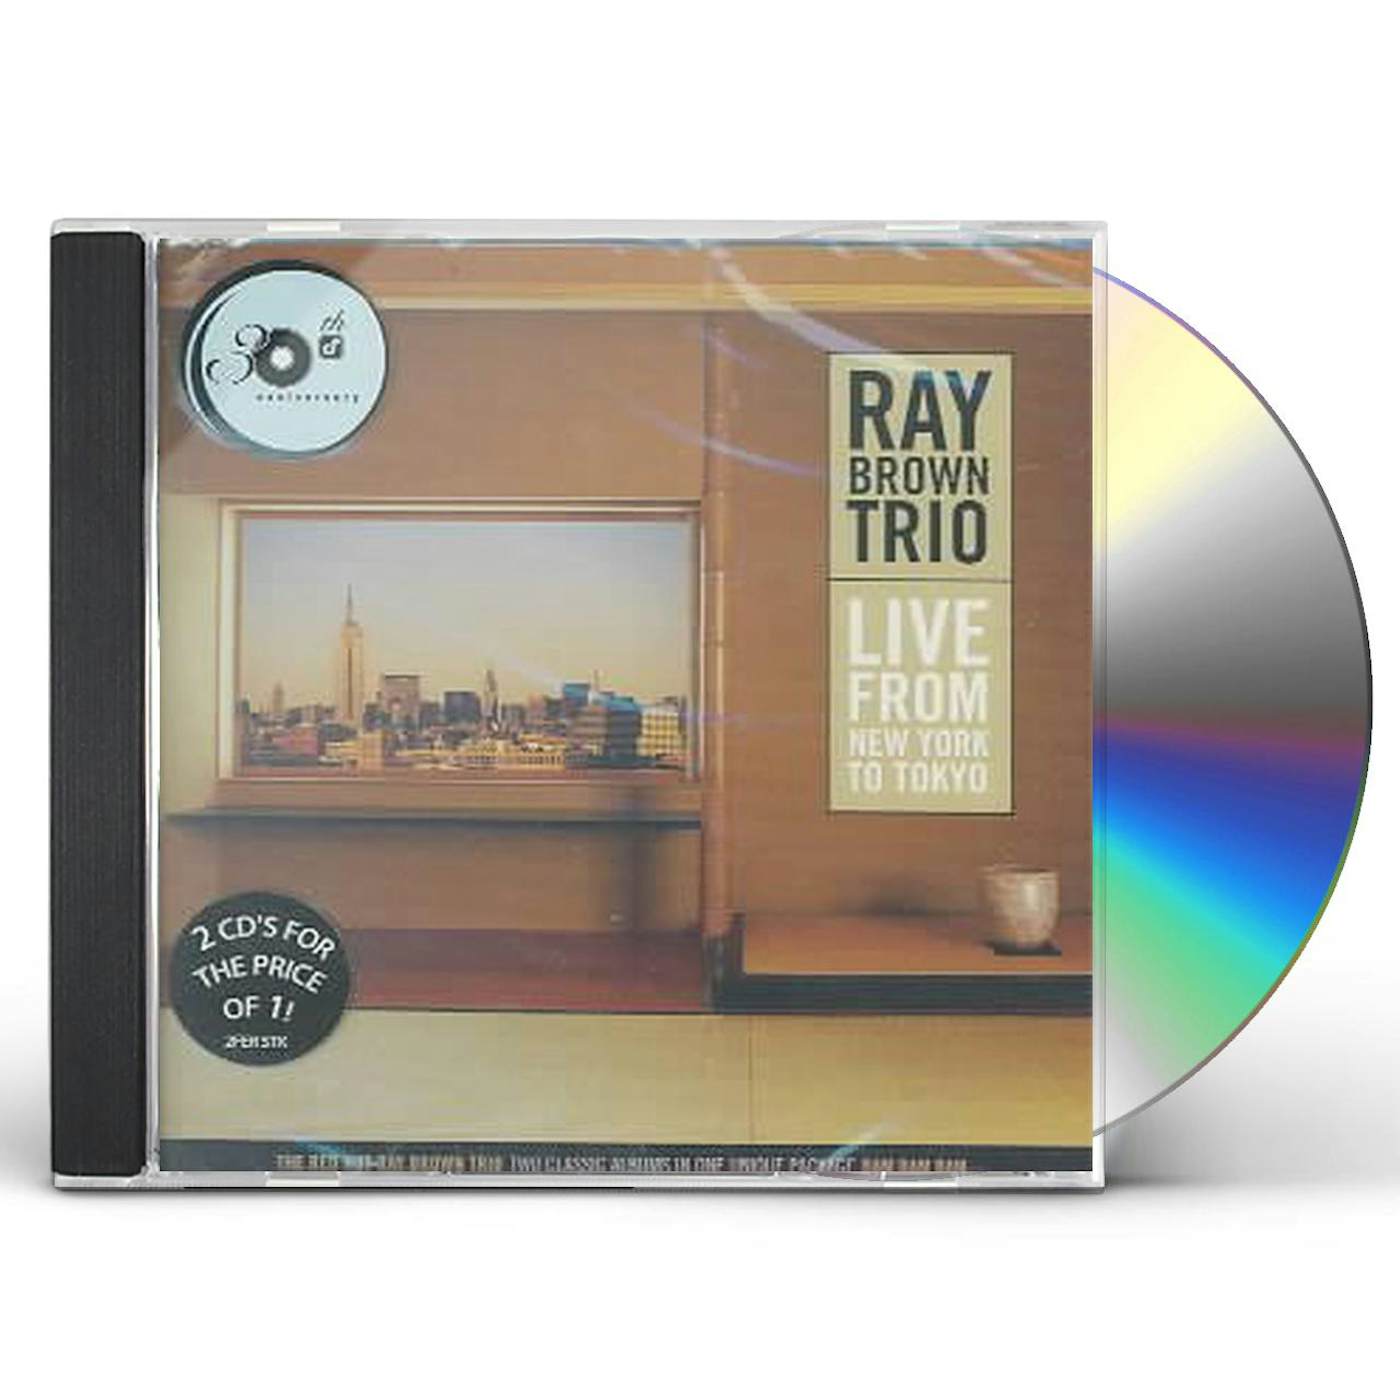 Ray Brown Trio LIVE FROM NEW YORK TO TOKYO CD